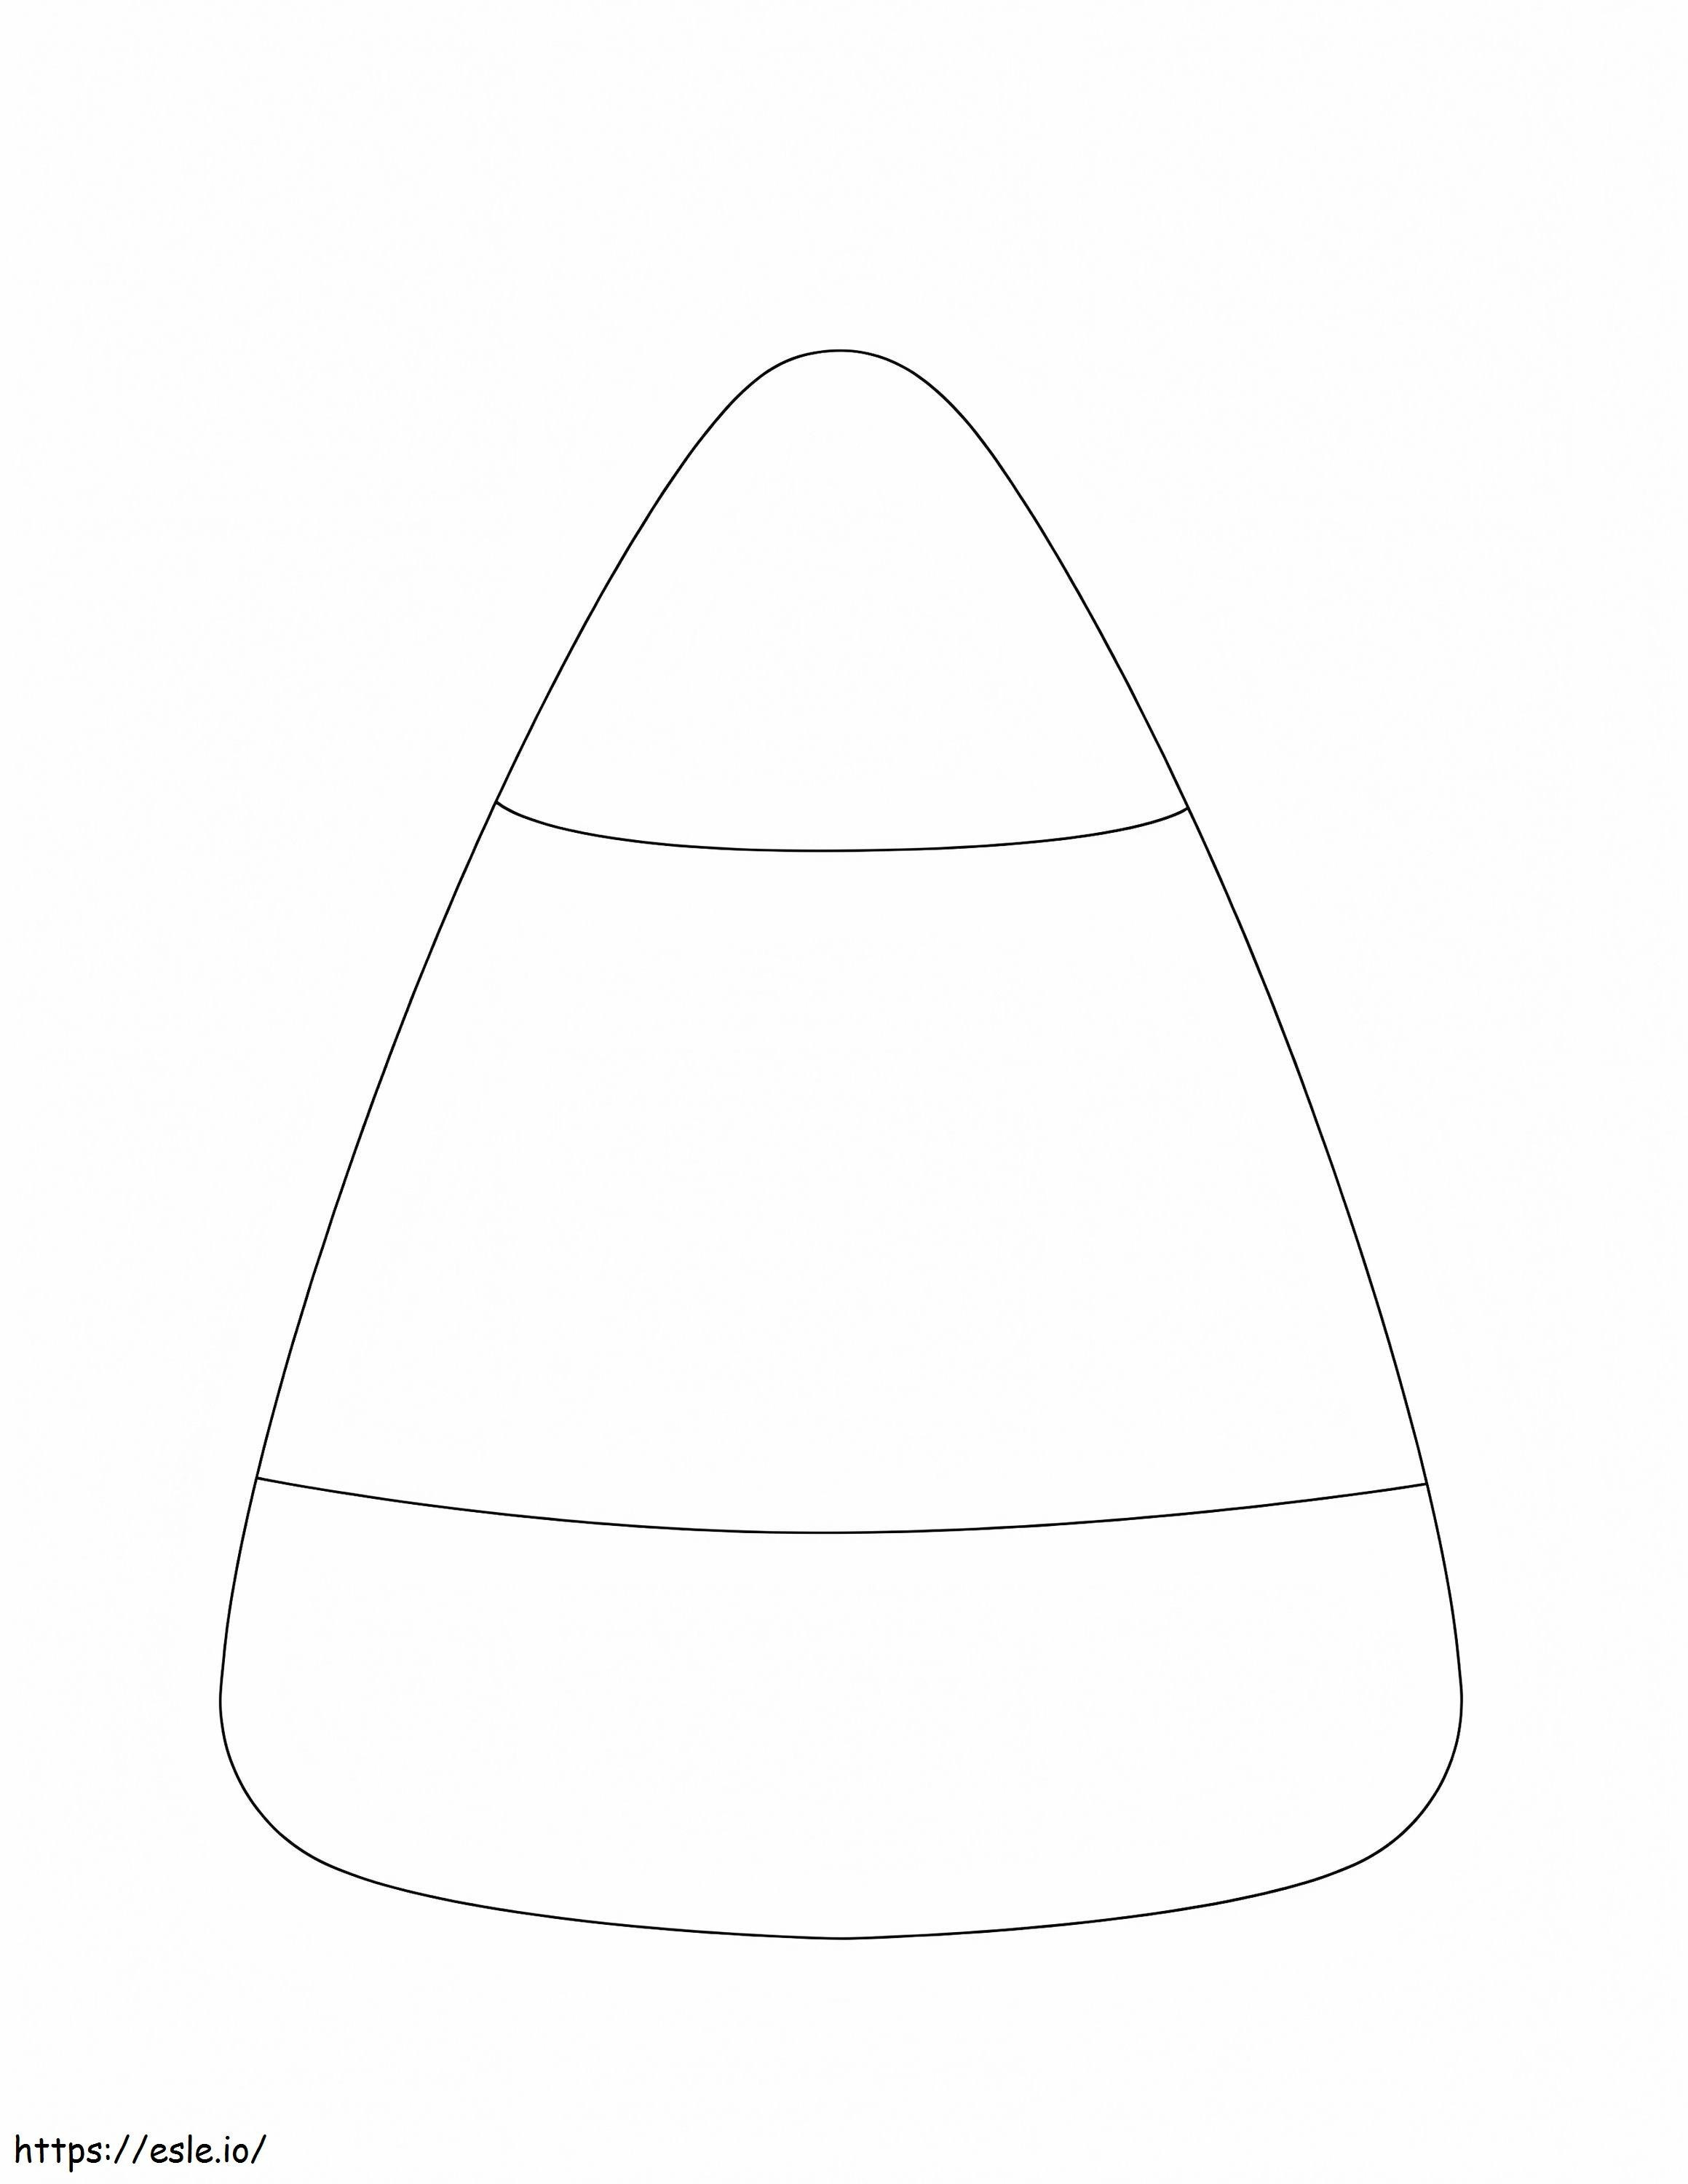 Simple Candy Corn coloring page